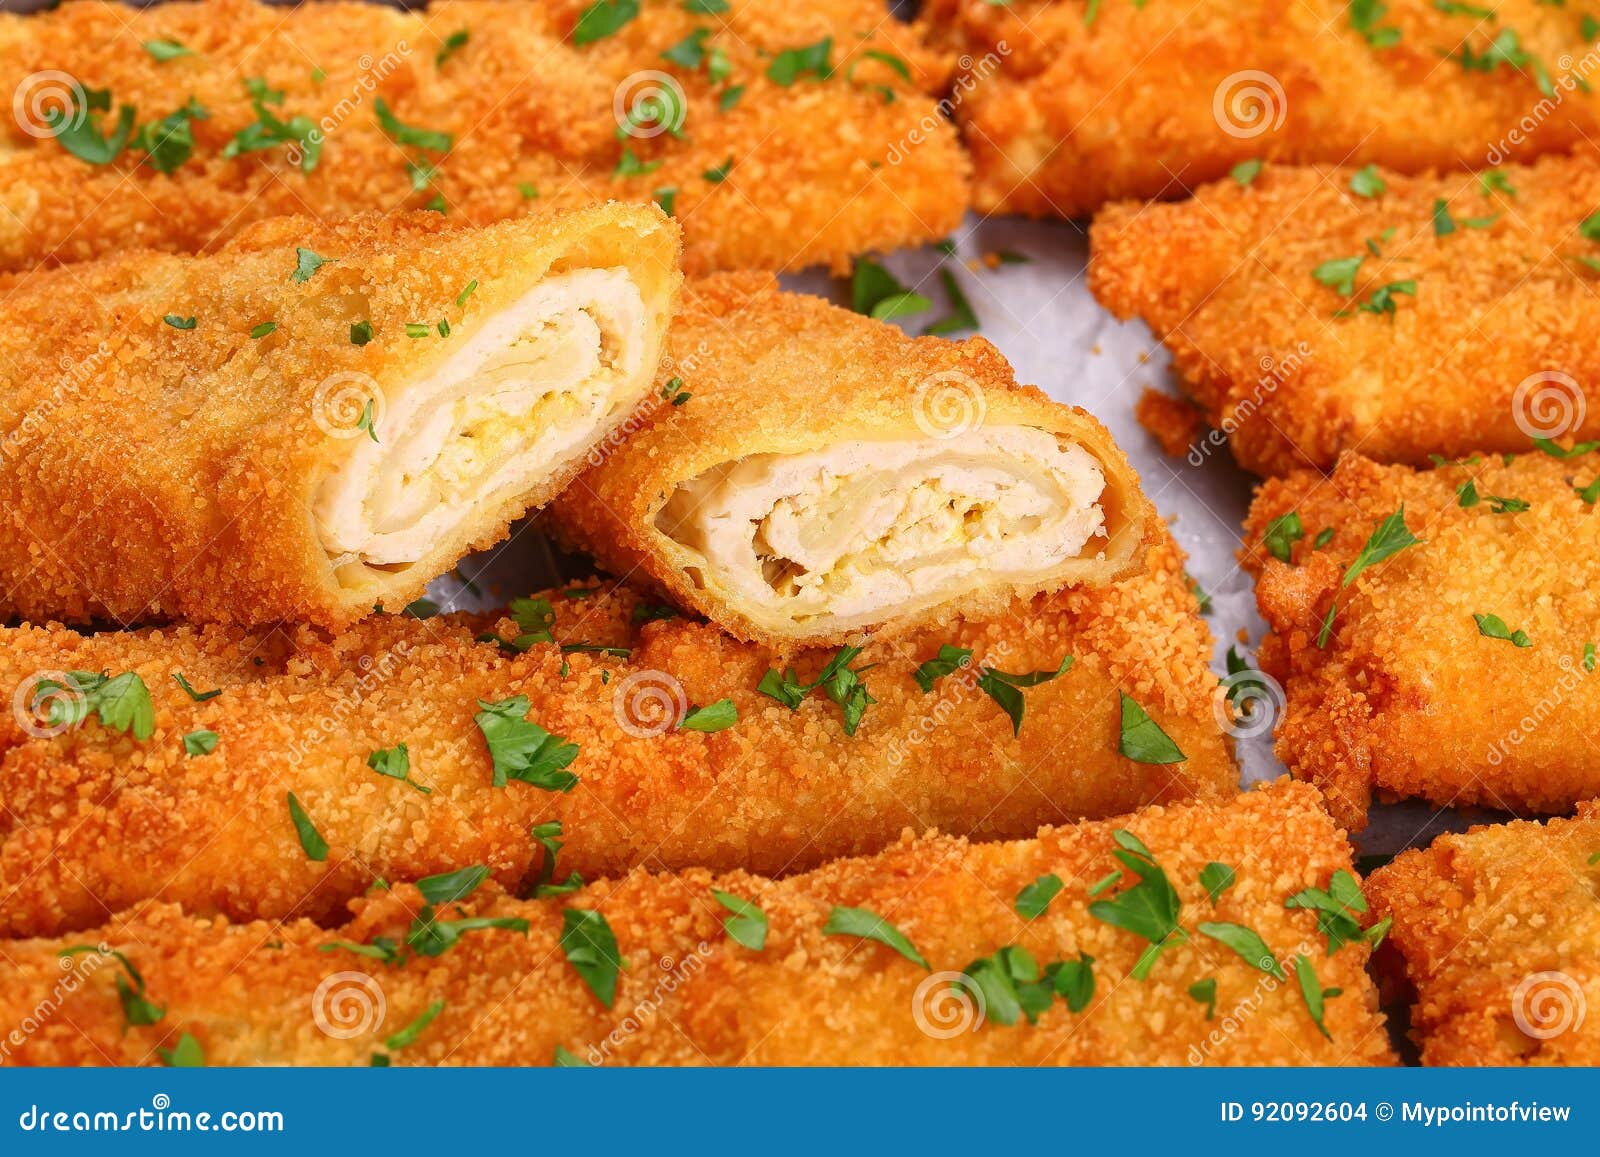 Crispy Chicken Cheese Breaded Roll Ups Close Up Stock Photo Image Of Chicken Appetizers 92092604